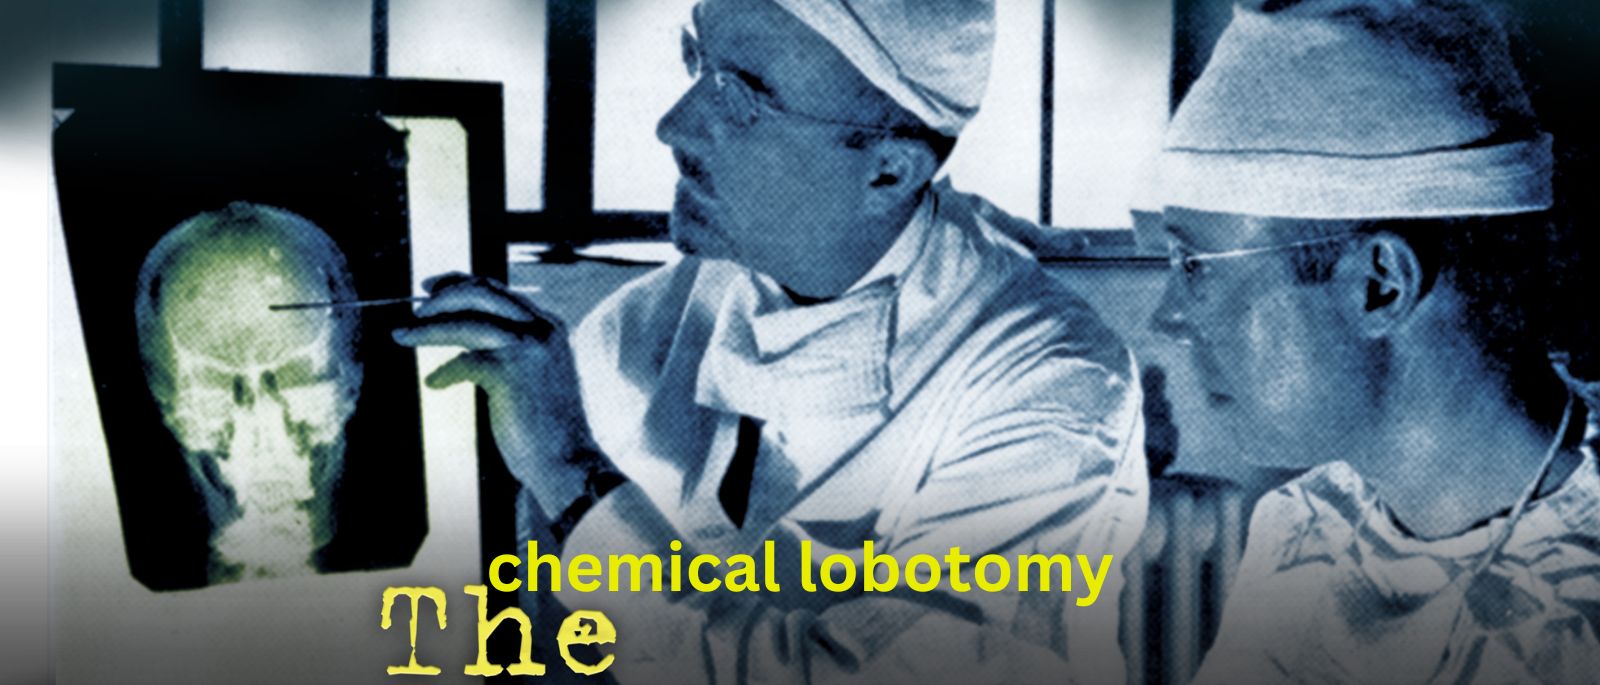 what is a chemical lobotomy